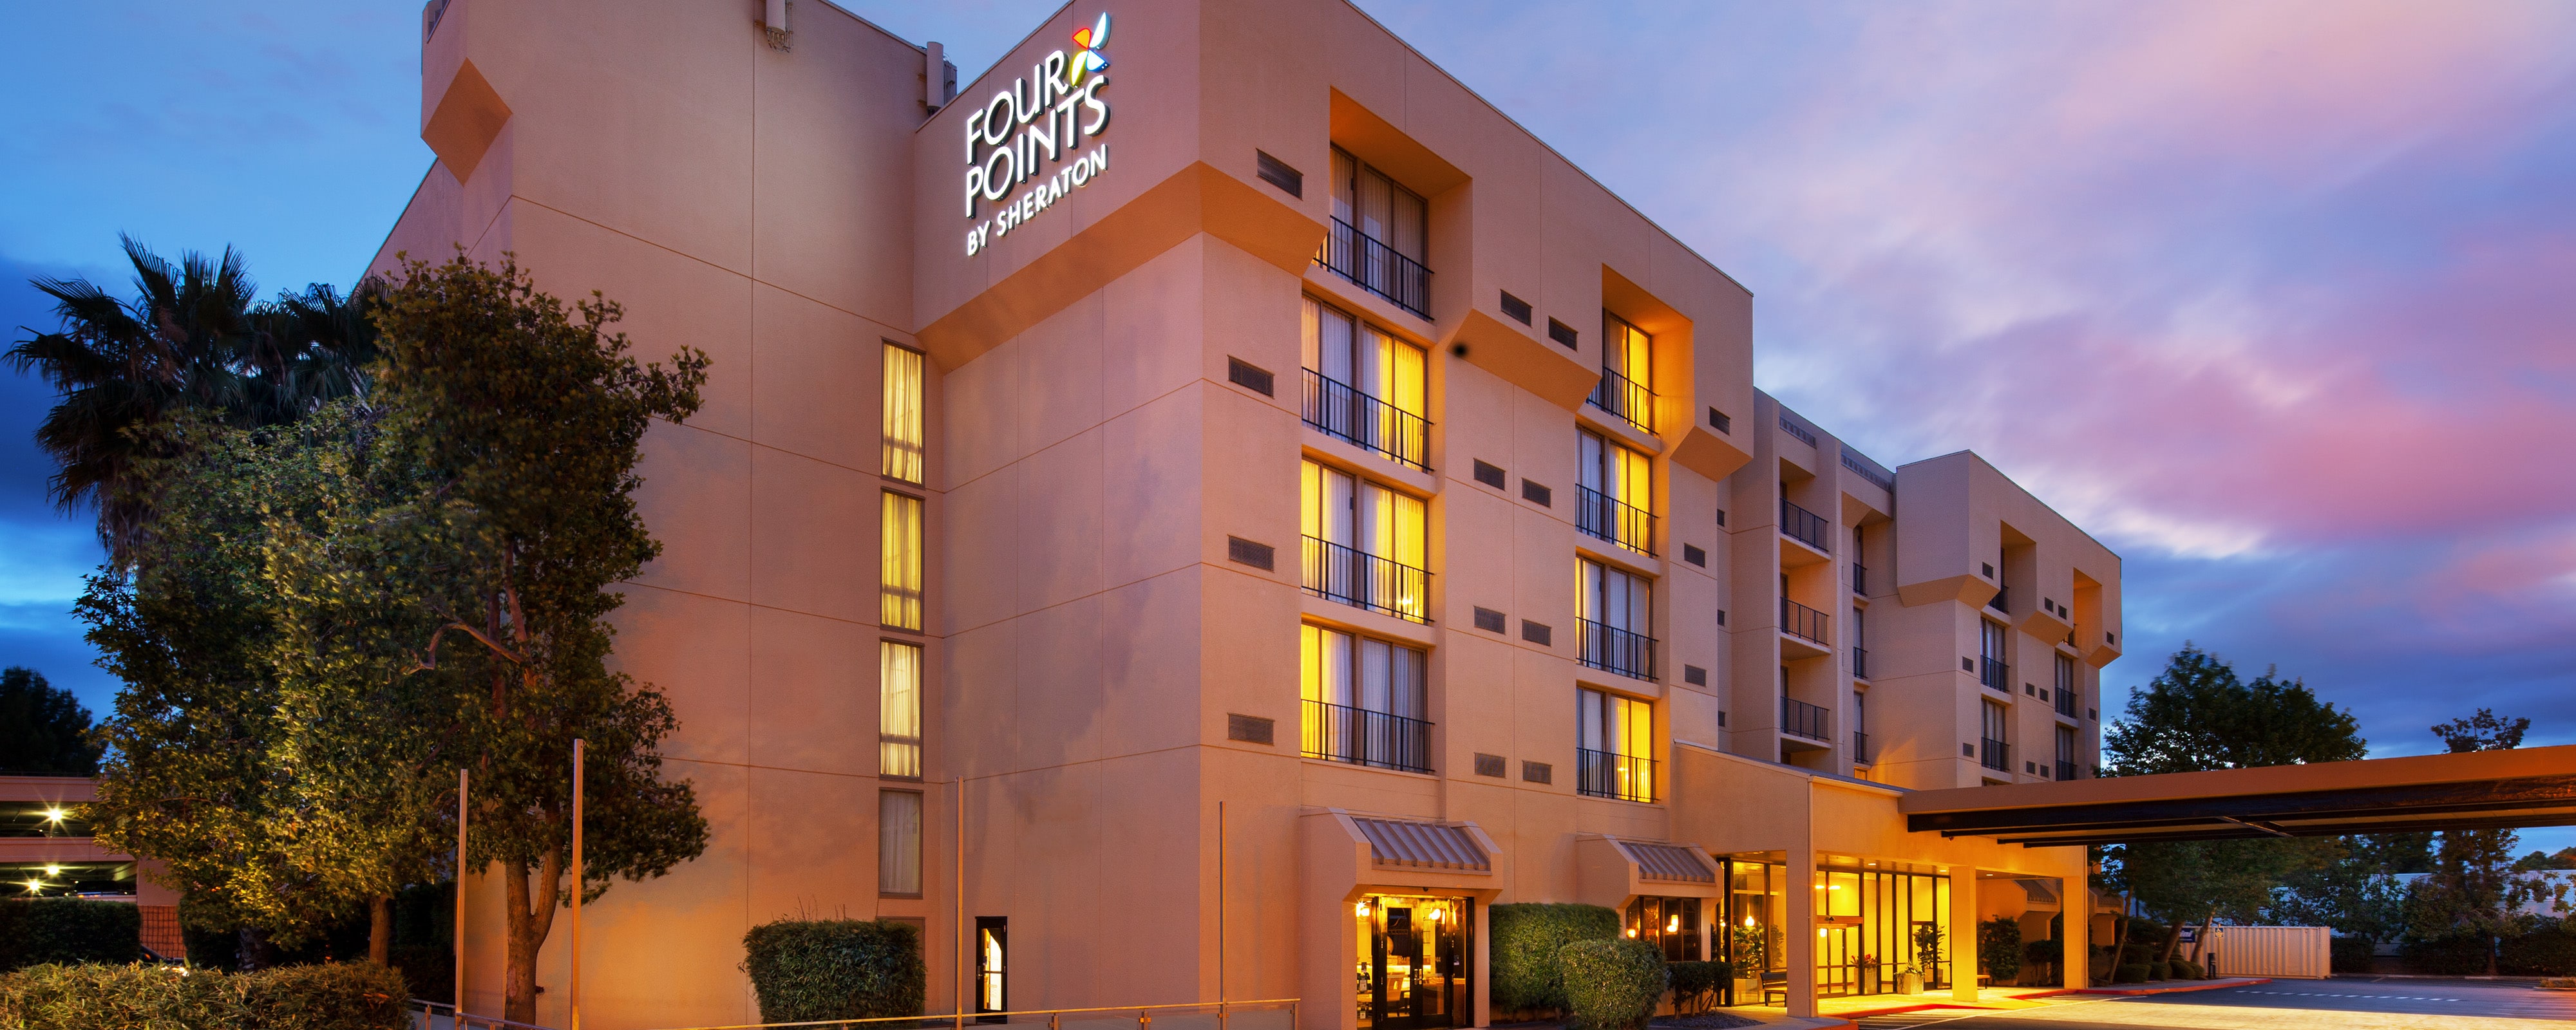 San Jose Hotels In California Four Points By Sheraton San Jose Airport